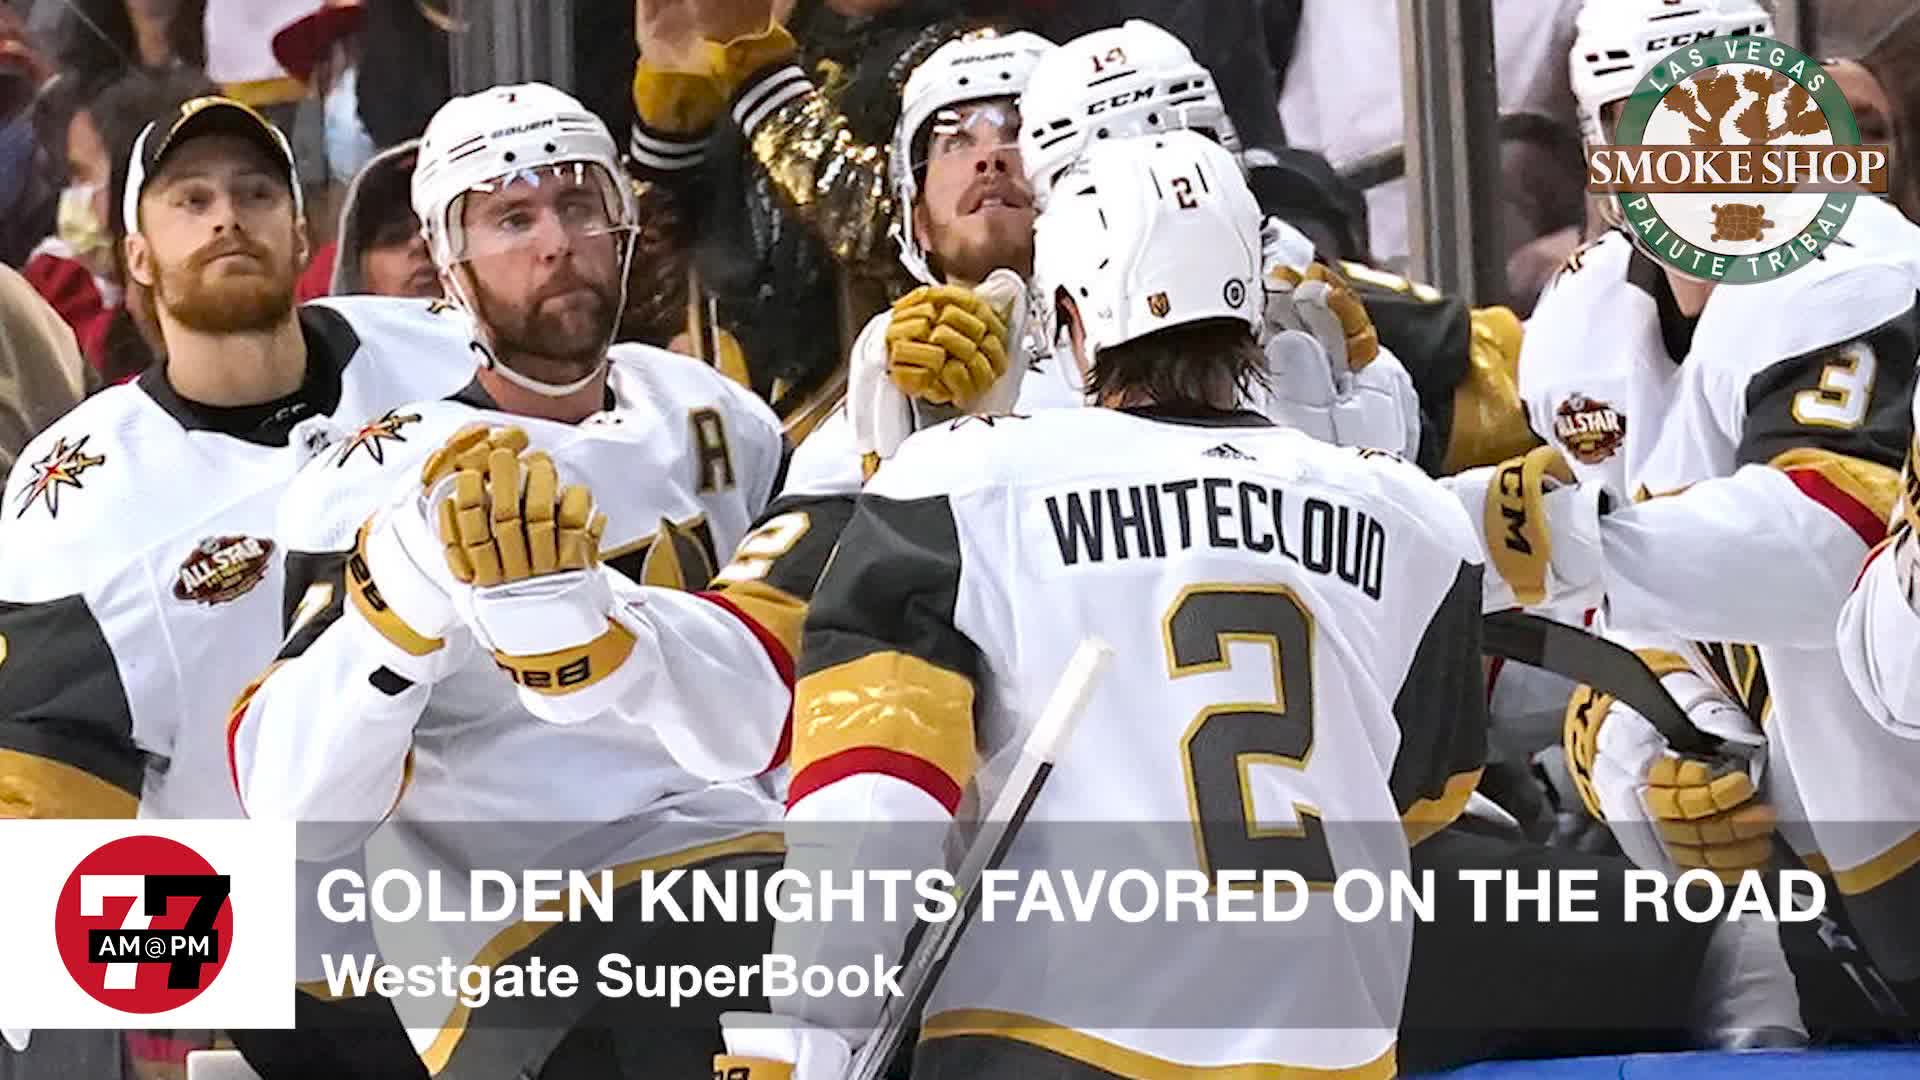 Golden Knights Favored in Arizona